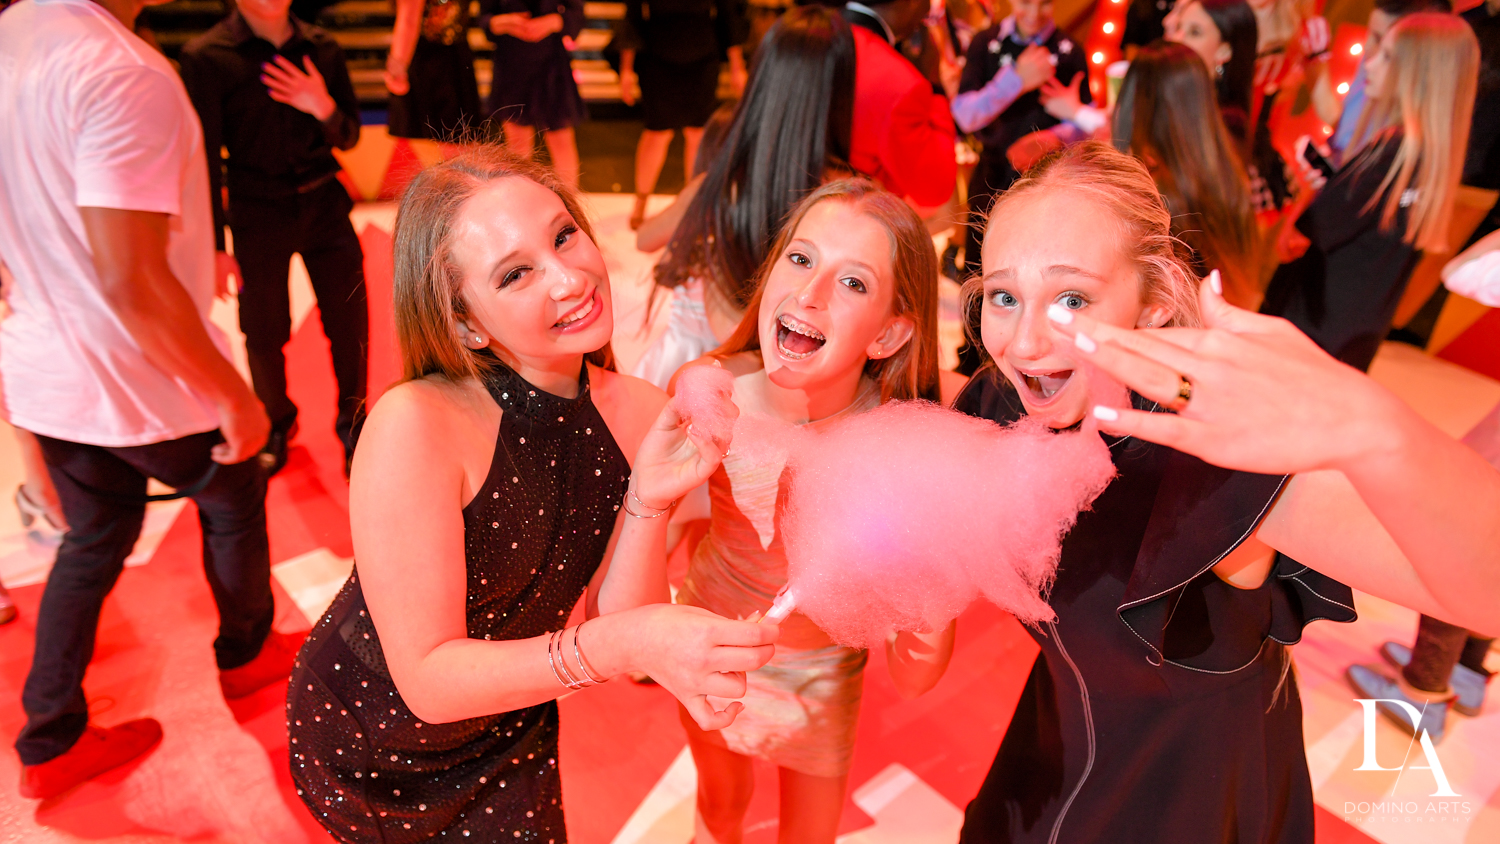 cotton candy at The Greatest Showman theme Bat Mitzvah at the filmore miami by Domino Arts Photography